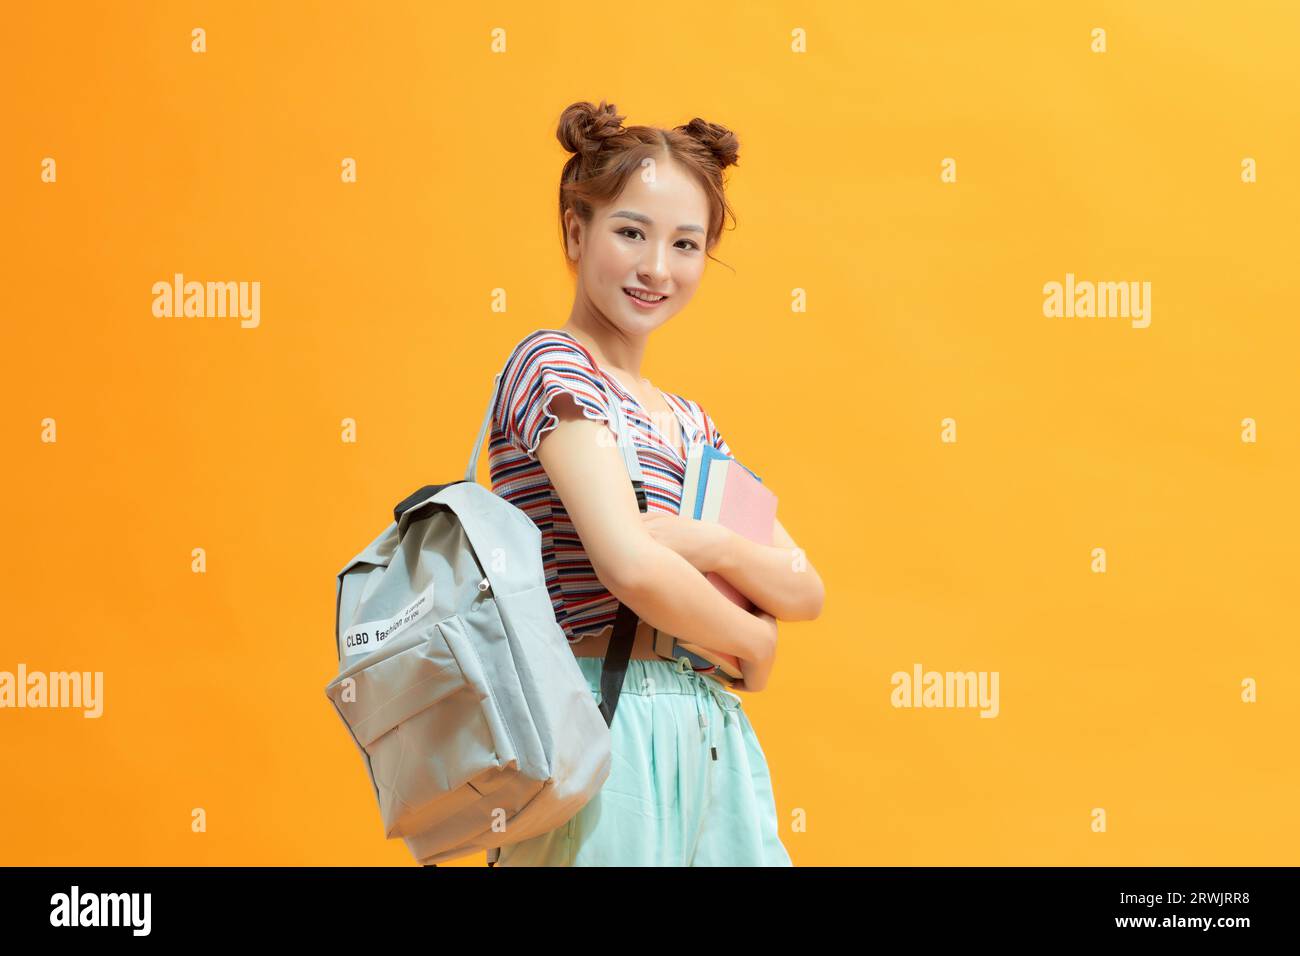 Young student holding backpack and books in studio photo Stock Photo